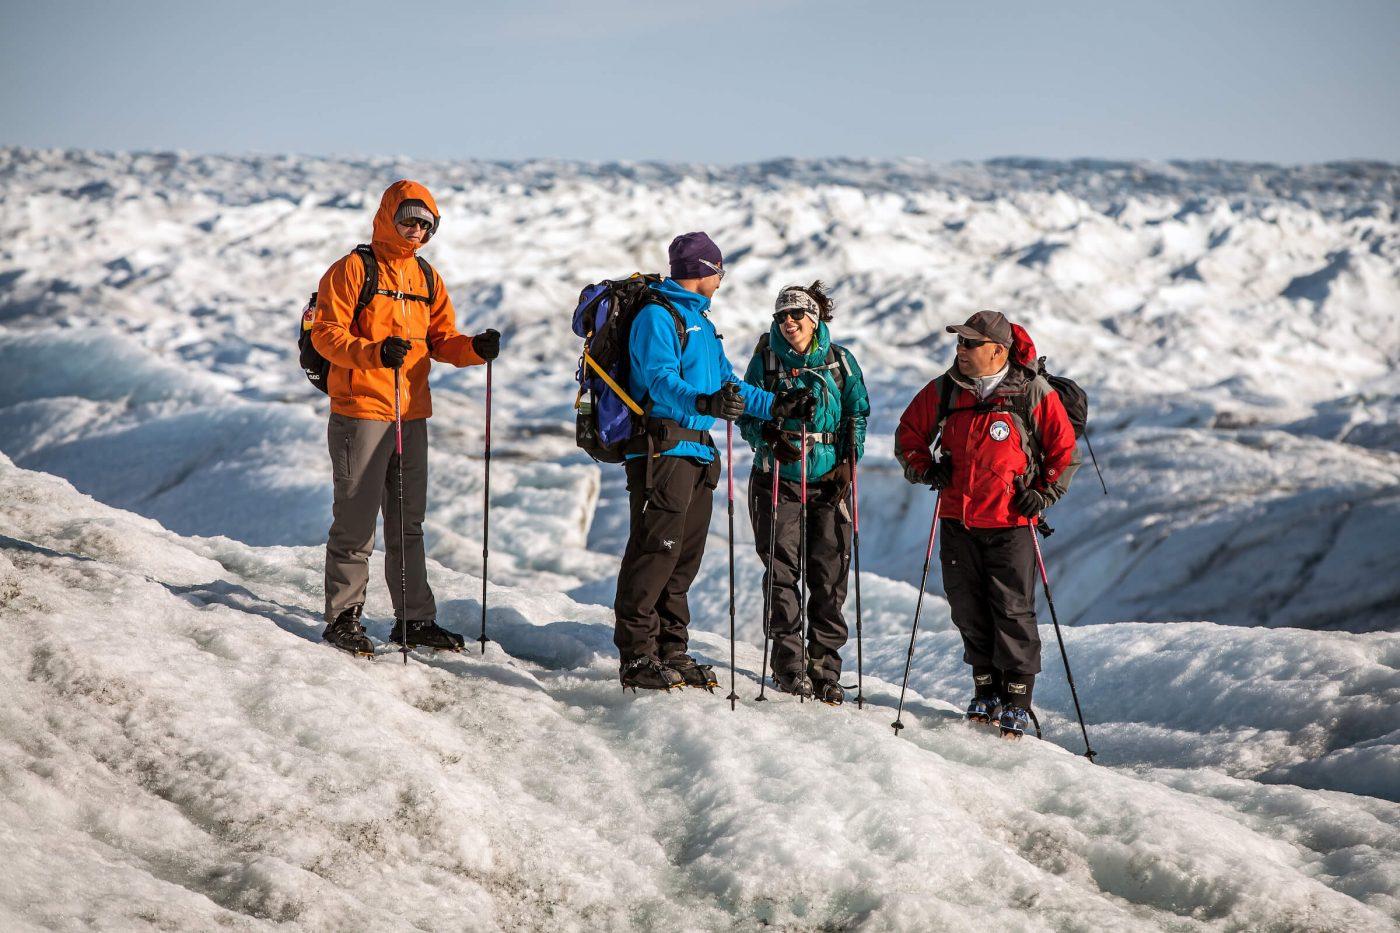 A group glacier walking on the Greenland Ice Sheet near Kangerlussuaq. Photo by Mads Pihl - Visit Greenland